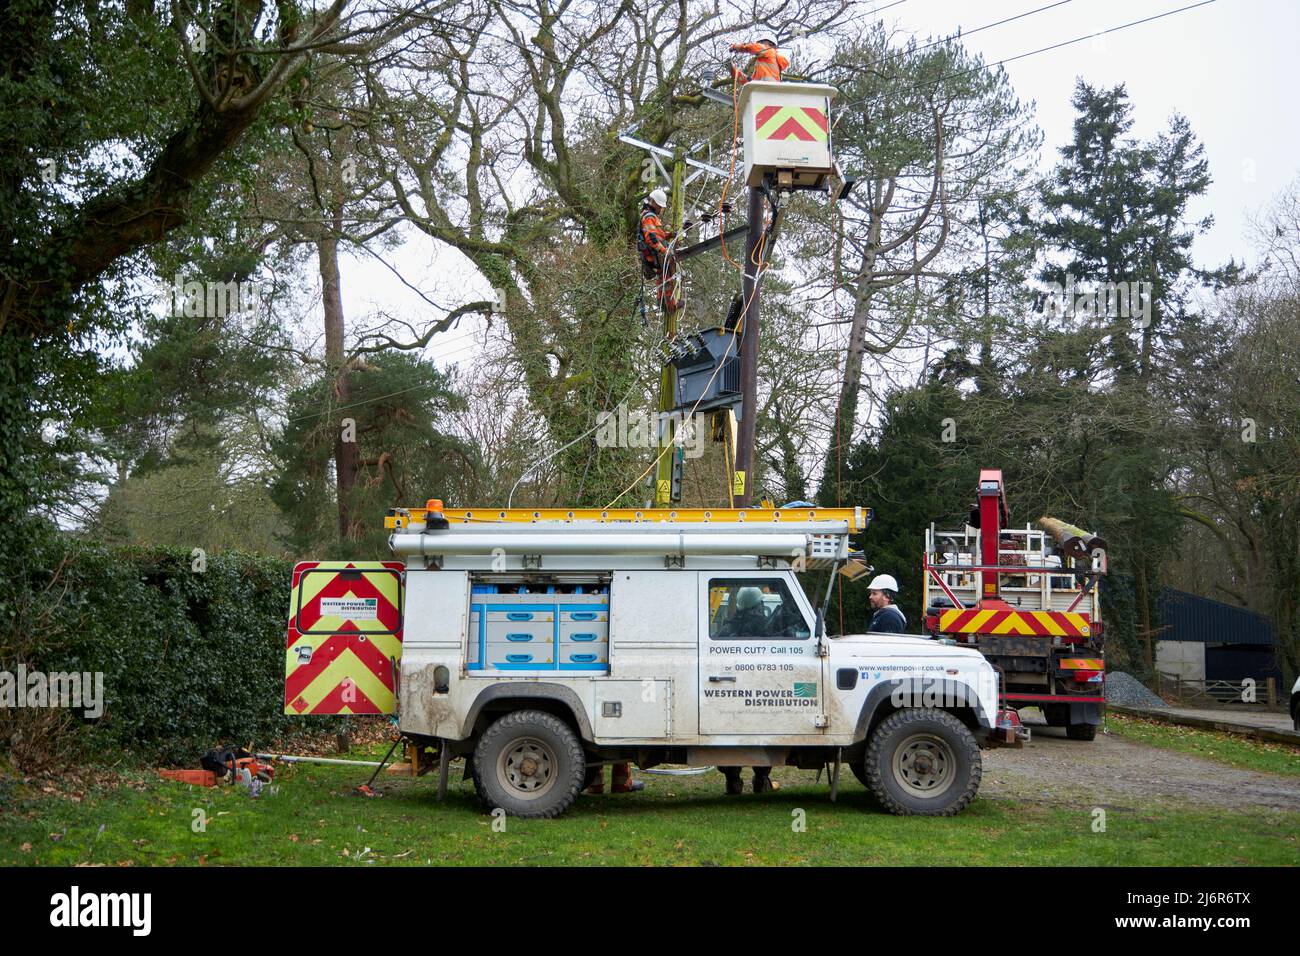 Powerline repairs by engineers from Western Power distribution serving Midlands, South West and Wales. Stock Photo